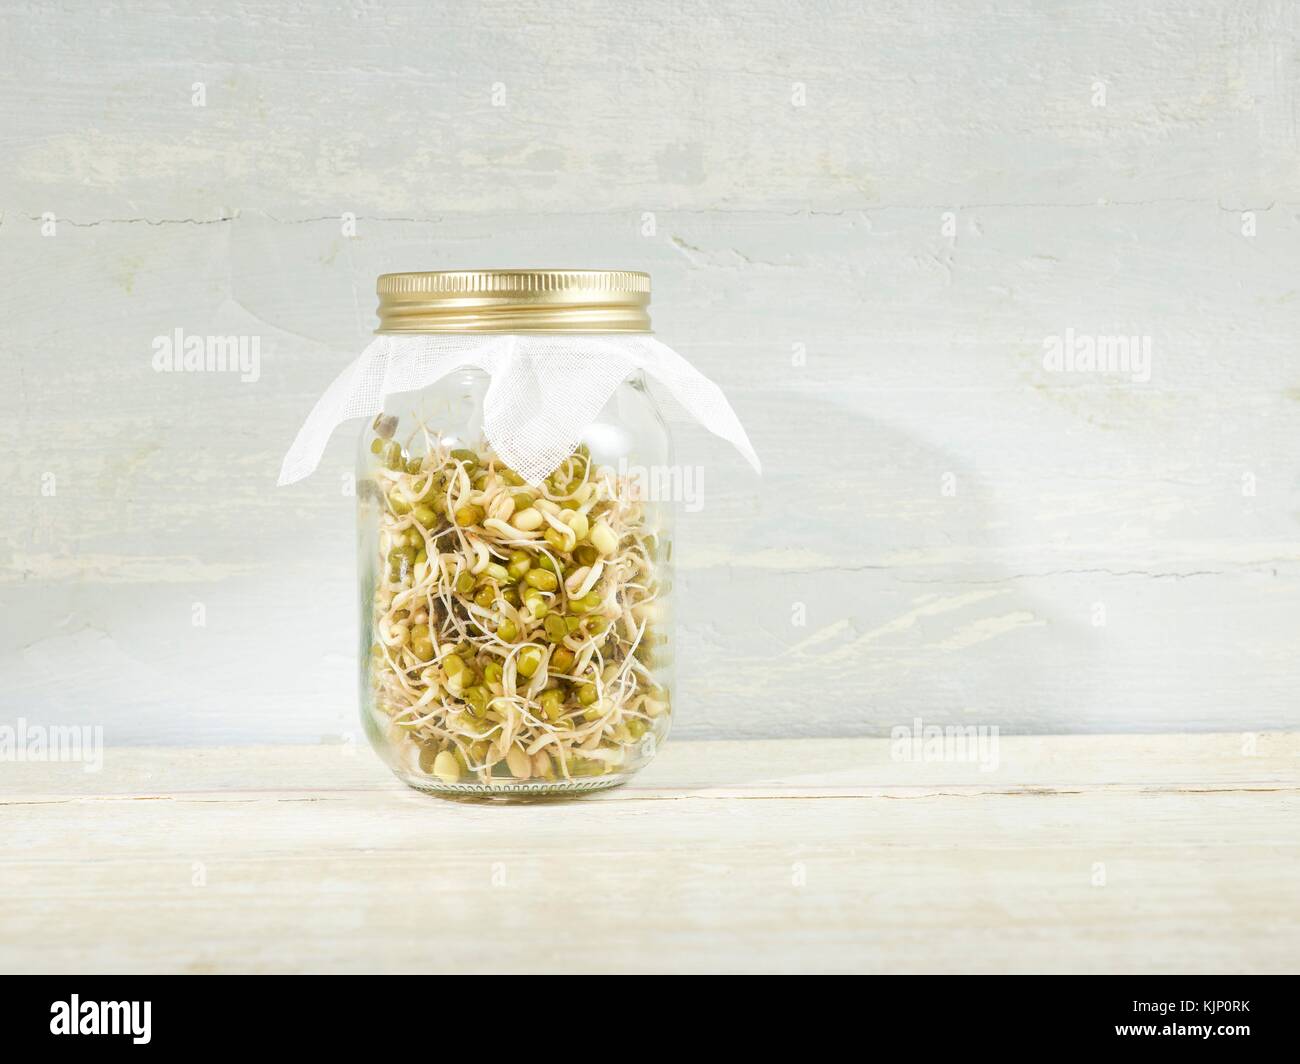 Sprouting mung beans in a jar. Stock Photo